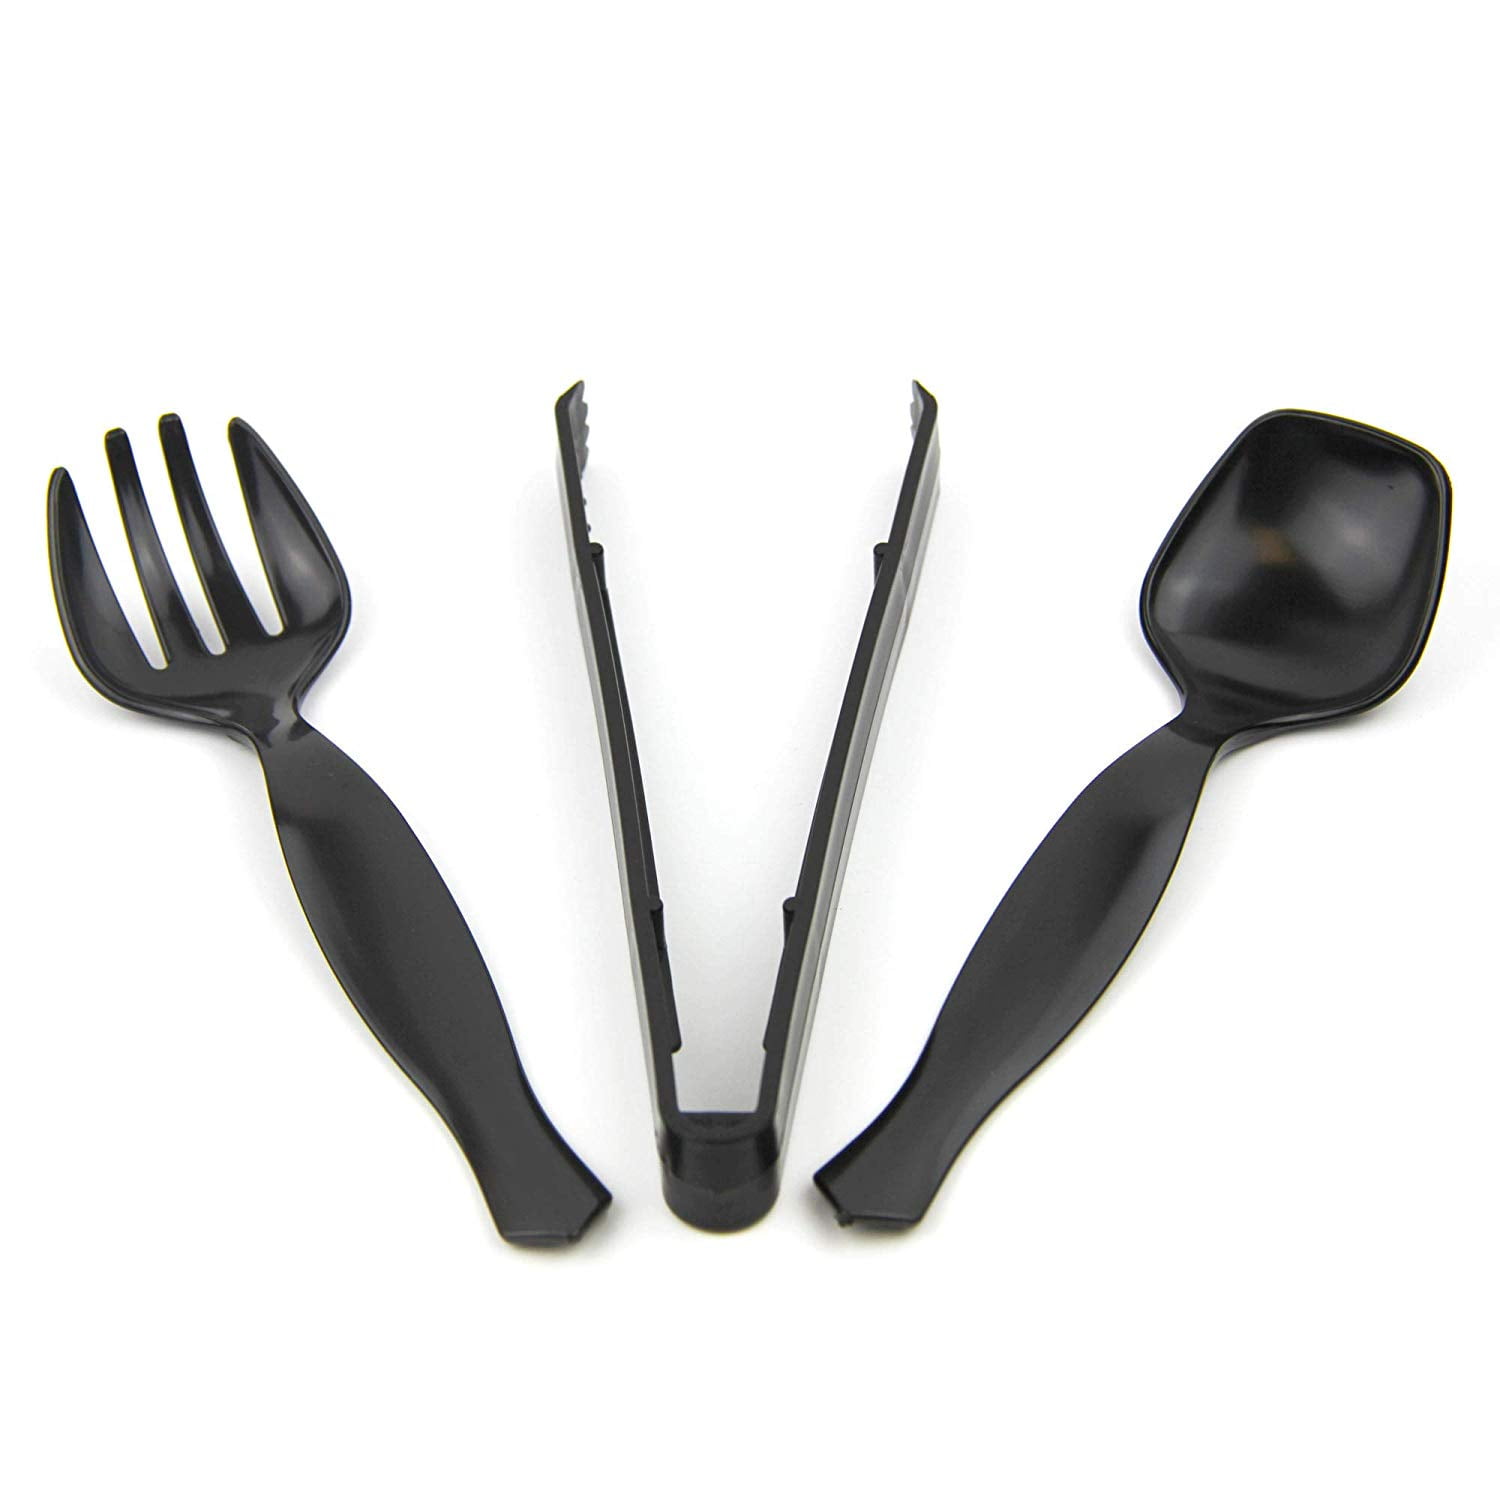 Party / BBQ / Buffet Set Disposable Plastic Tongs and Salad Serving Spoons 